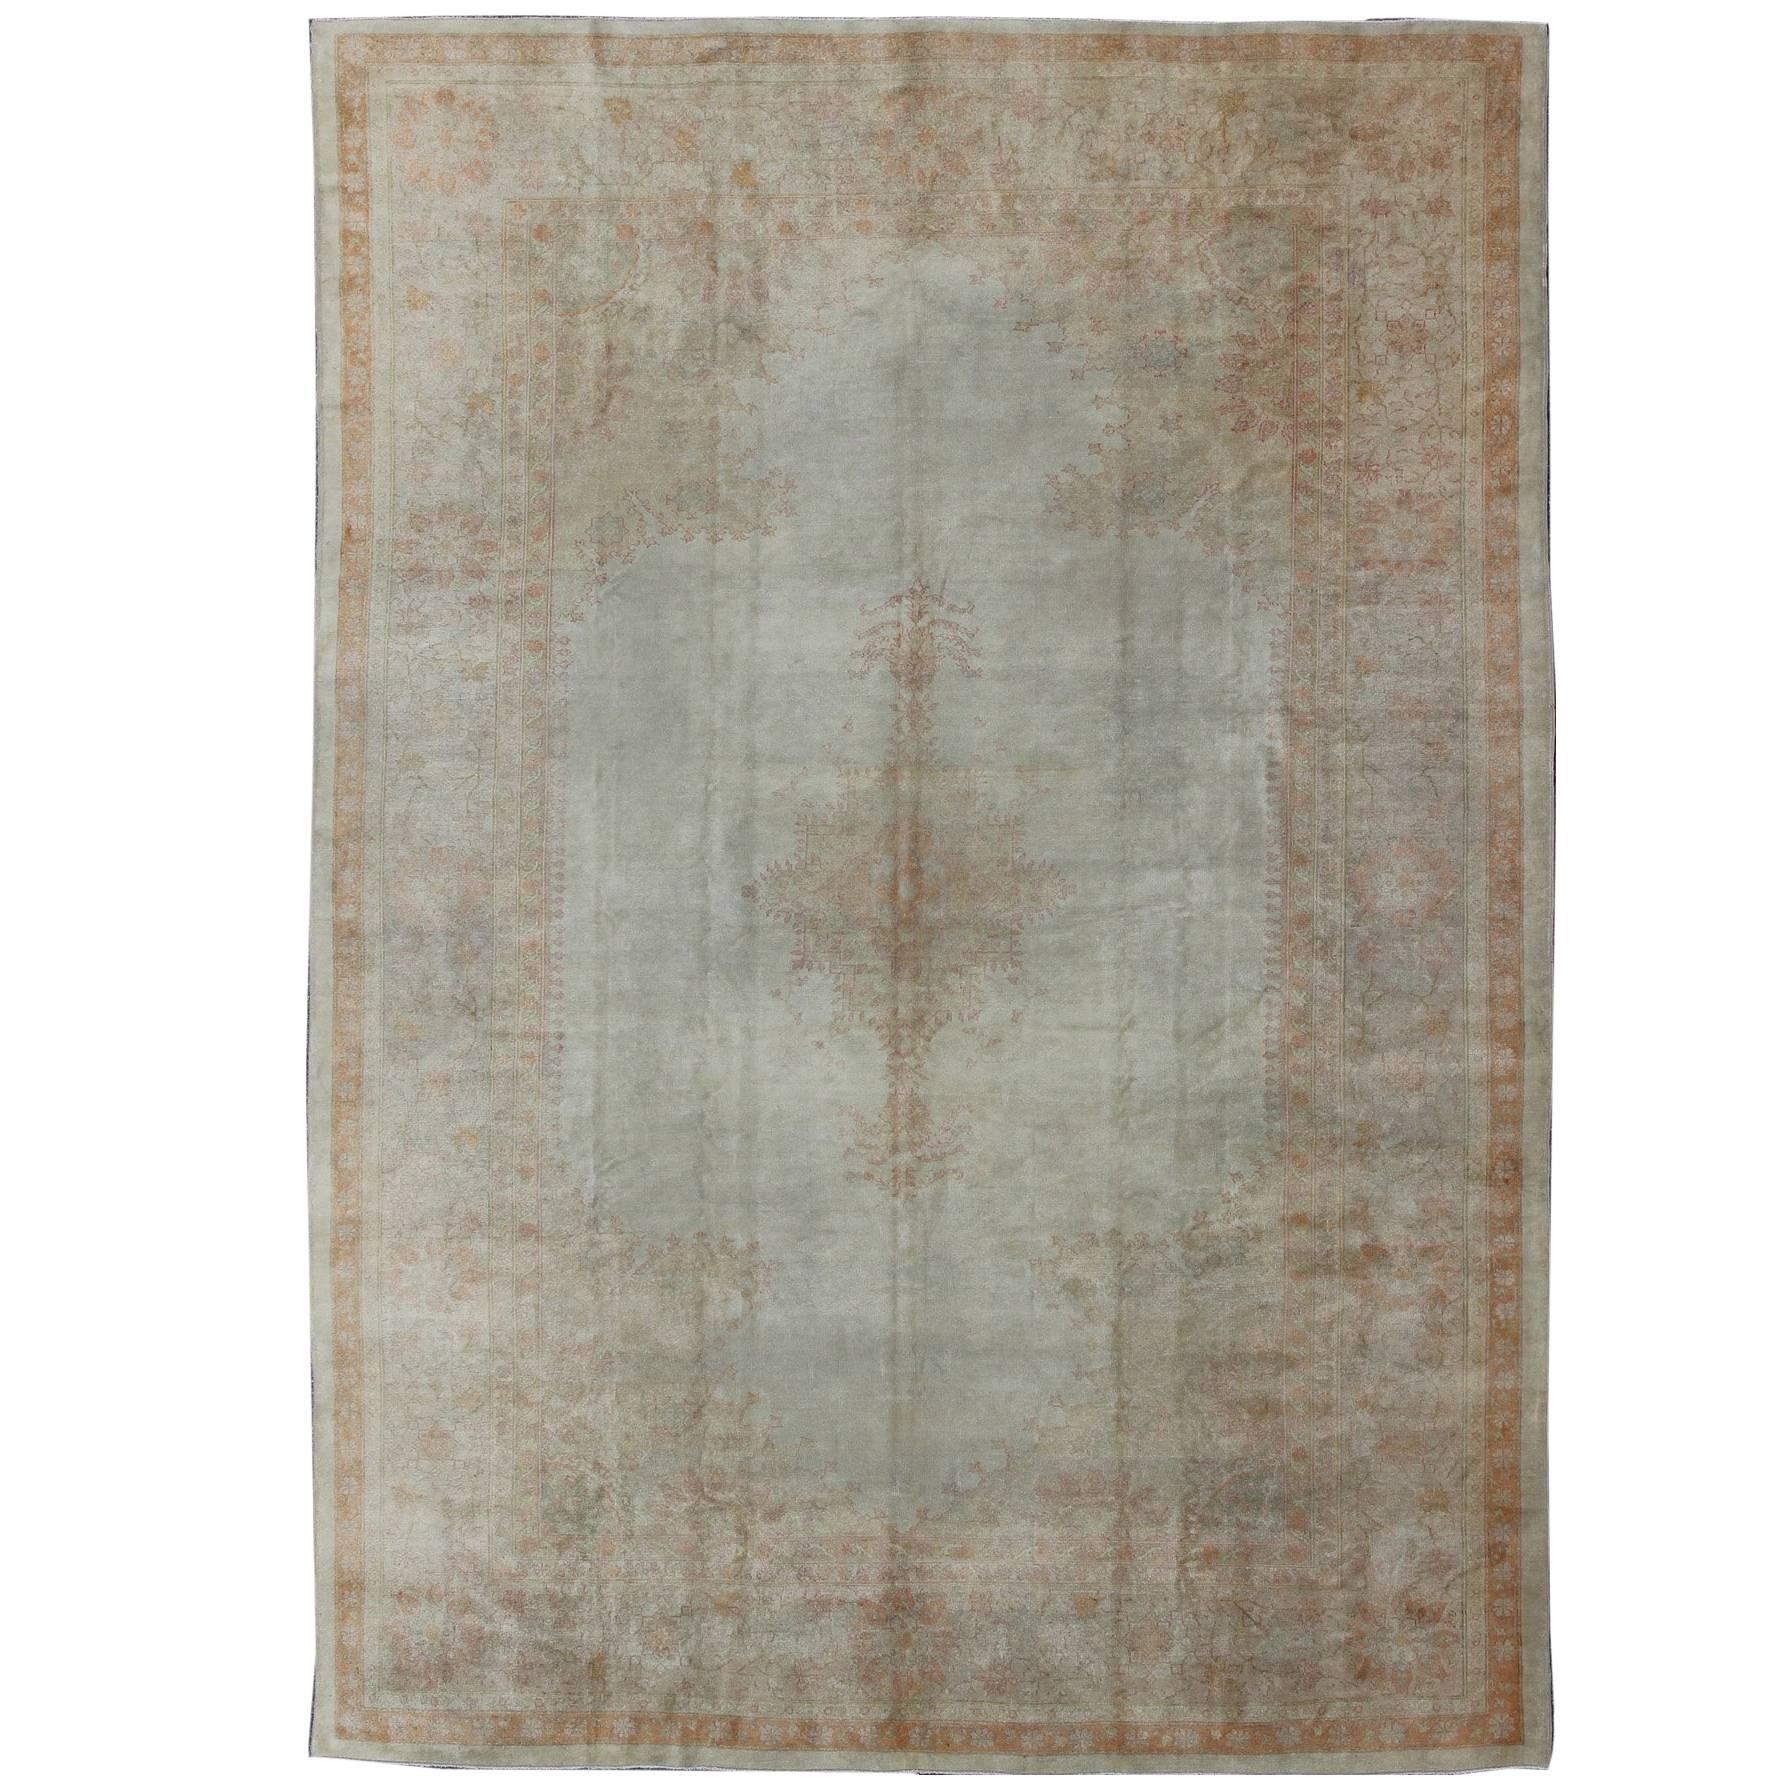 Antique Turkish Burlu Oushak Rug with Fine Weave in Muted Colors